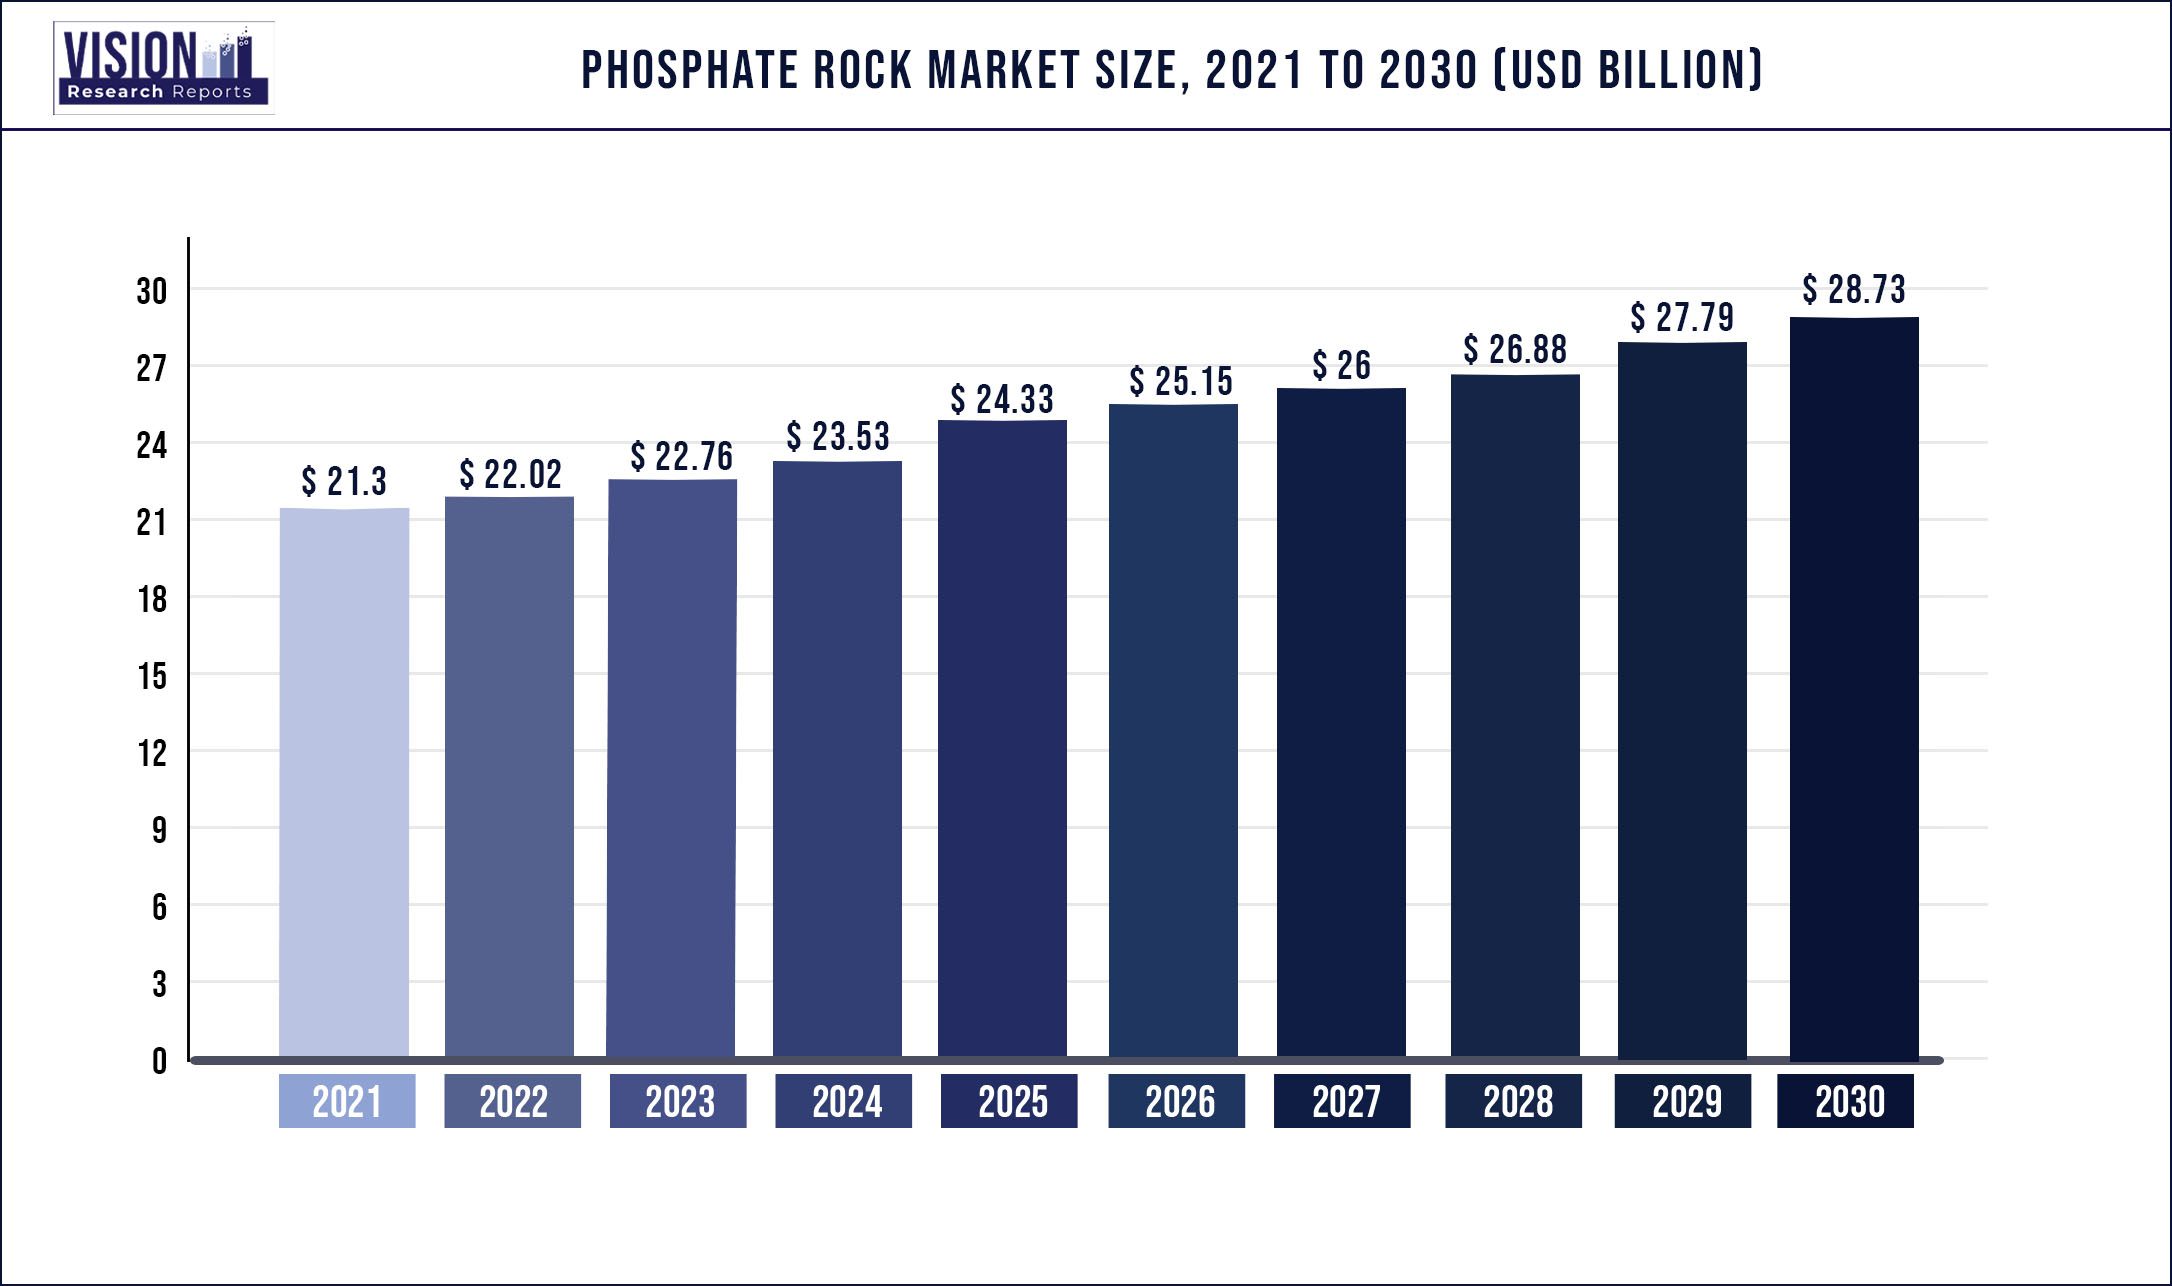 Phosphate Rock Market Size 2021 to 2030